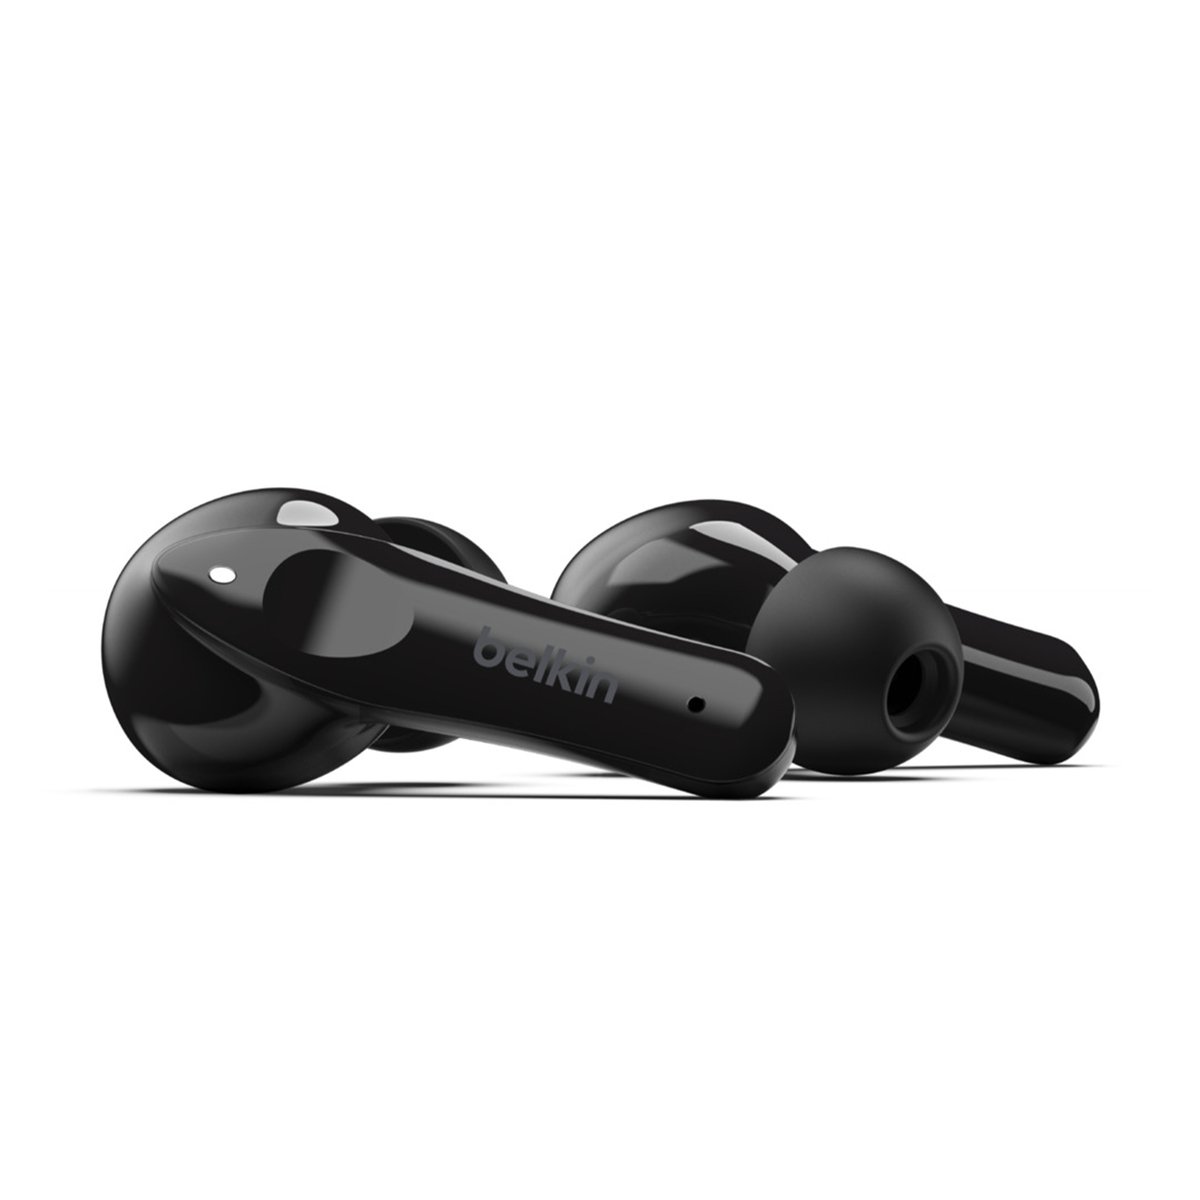 SOUNDFORM Move True Wireless Earbuds With Charging Case Black (PAC001btBK-GR)